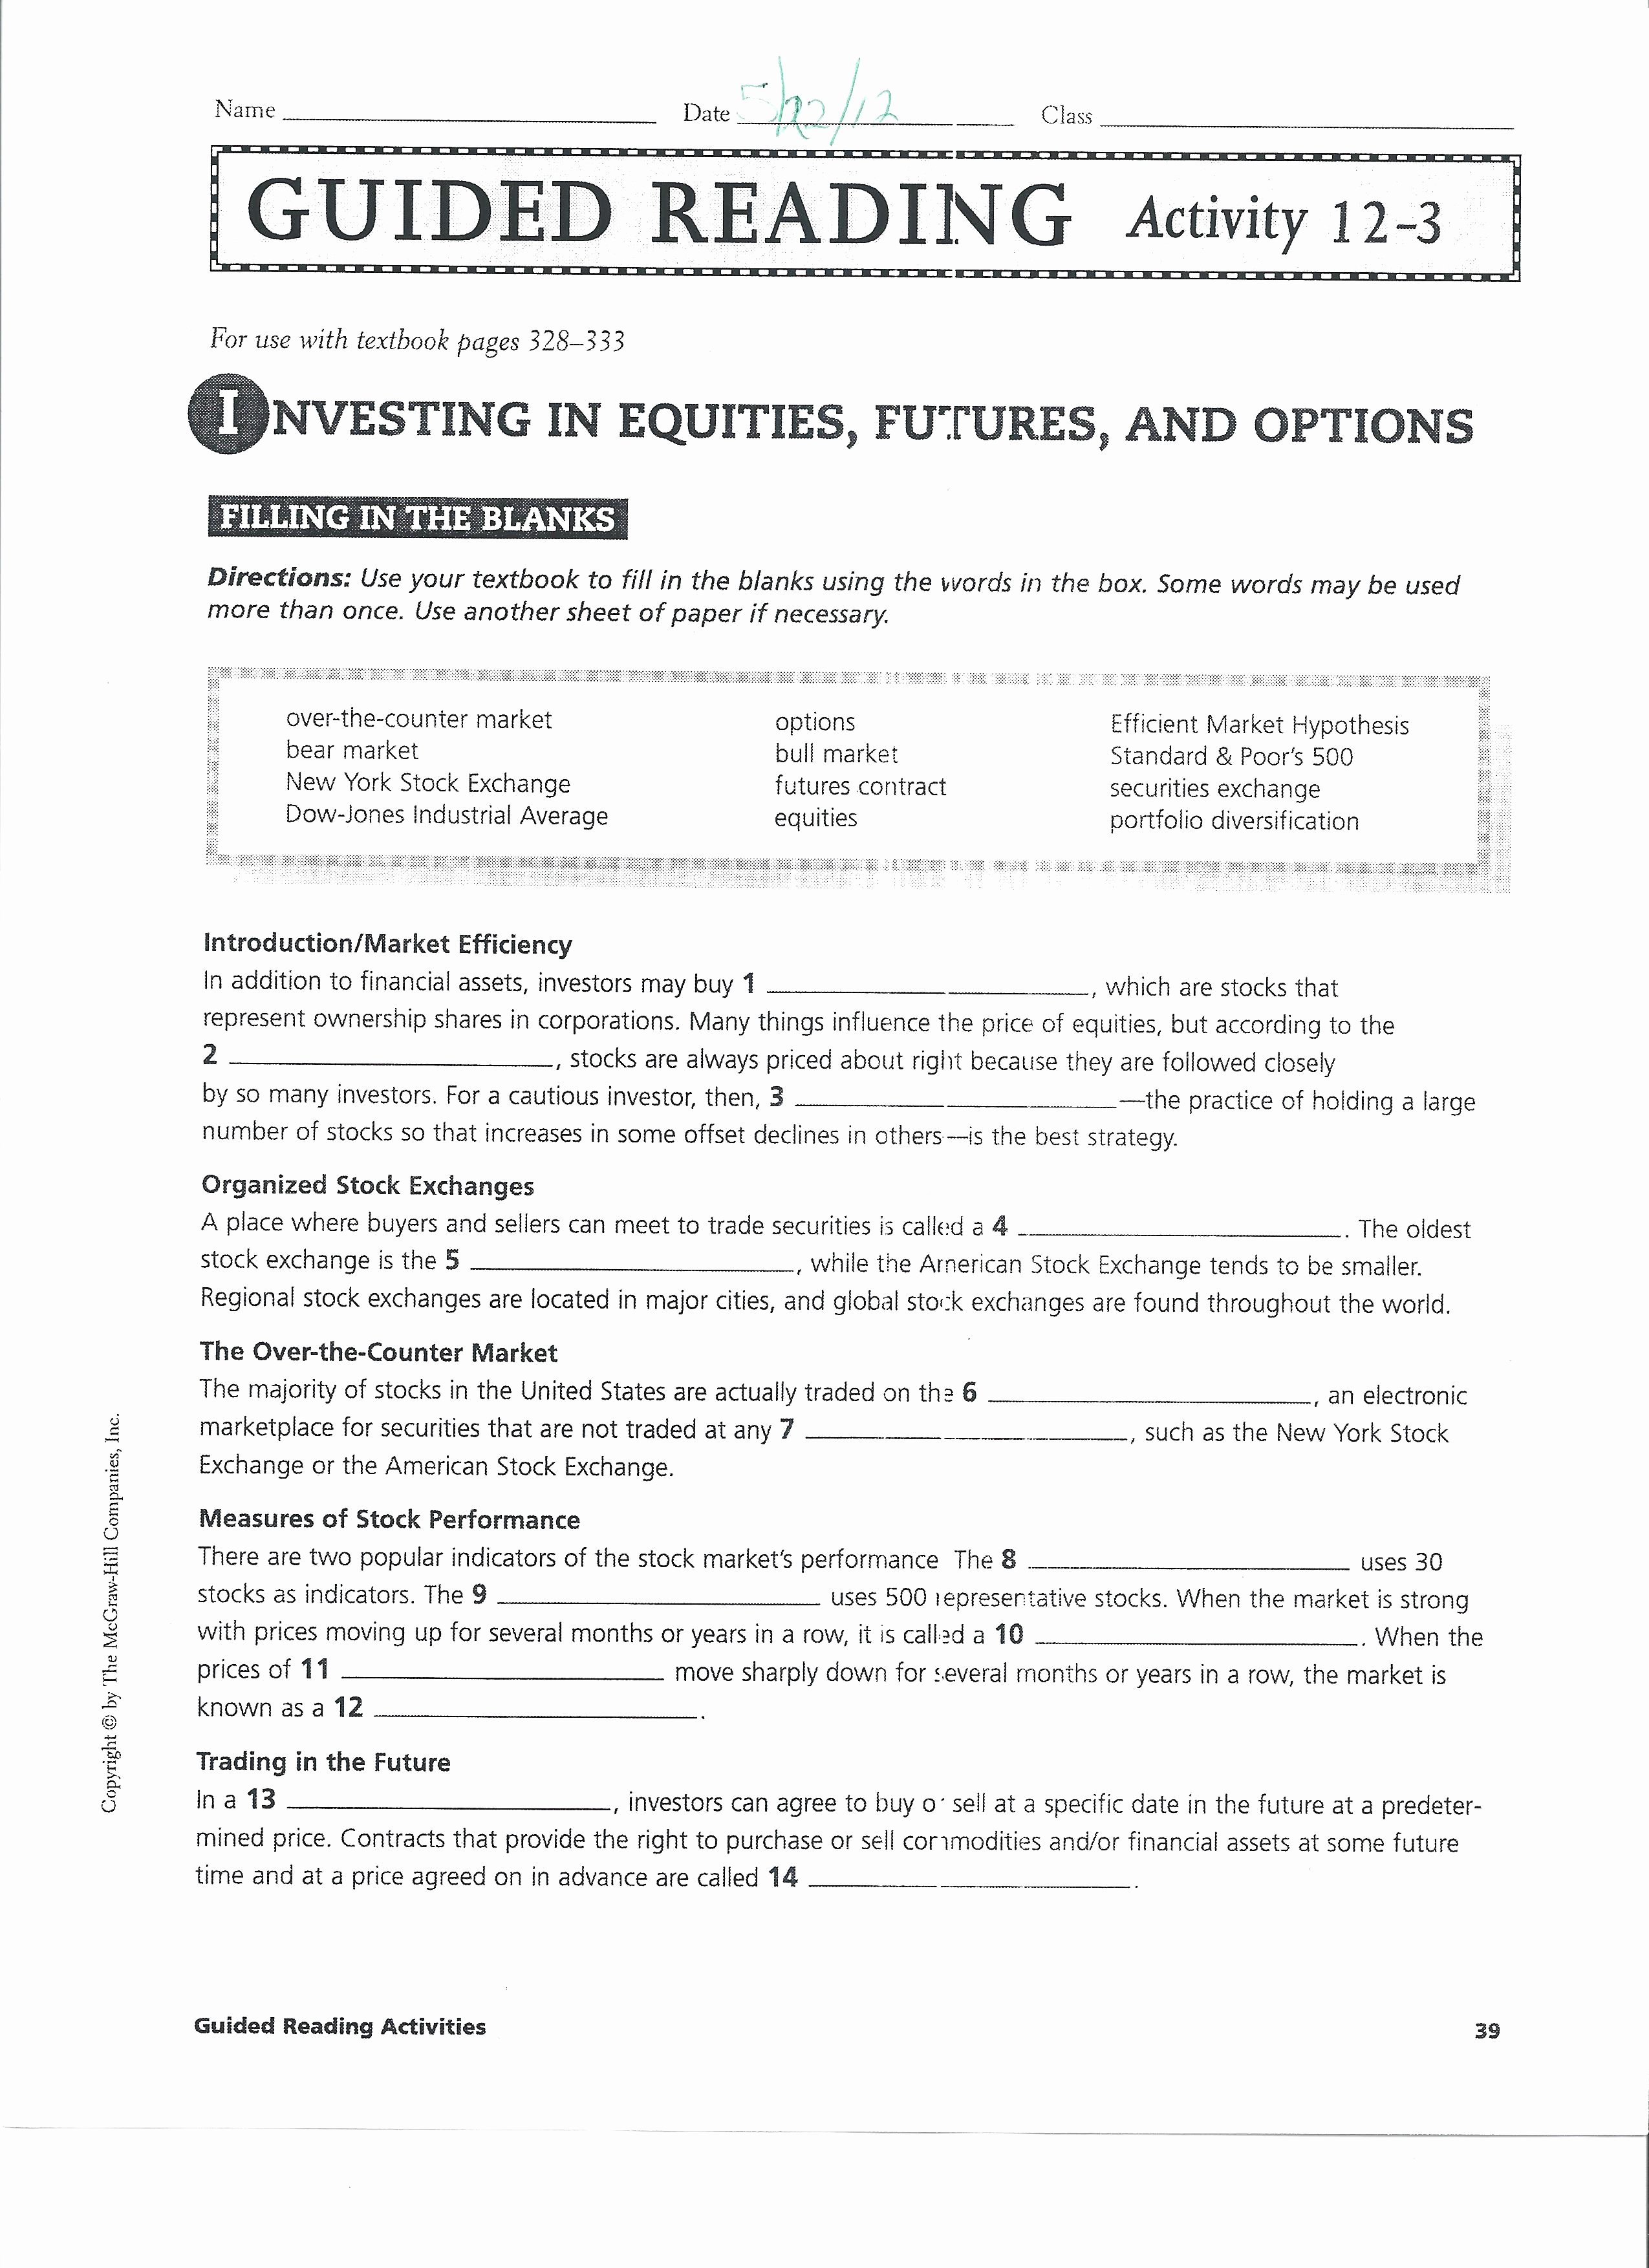 Factors Of Production Worksheet Answers Beautiful Guided Reading Activity 2 1 Economic Systems Worksheet